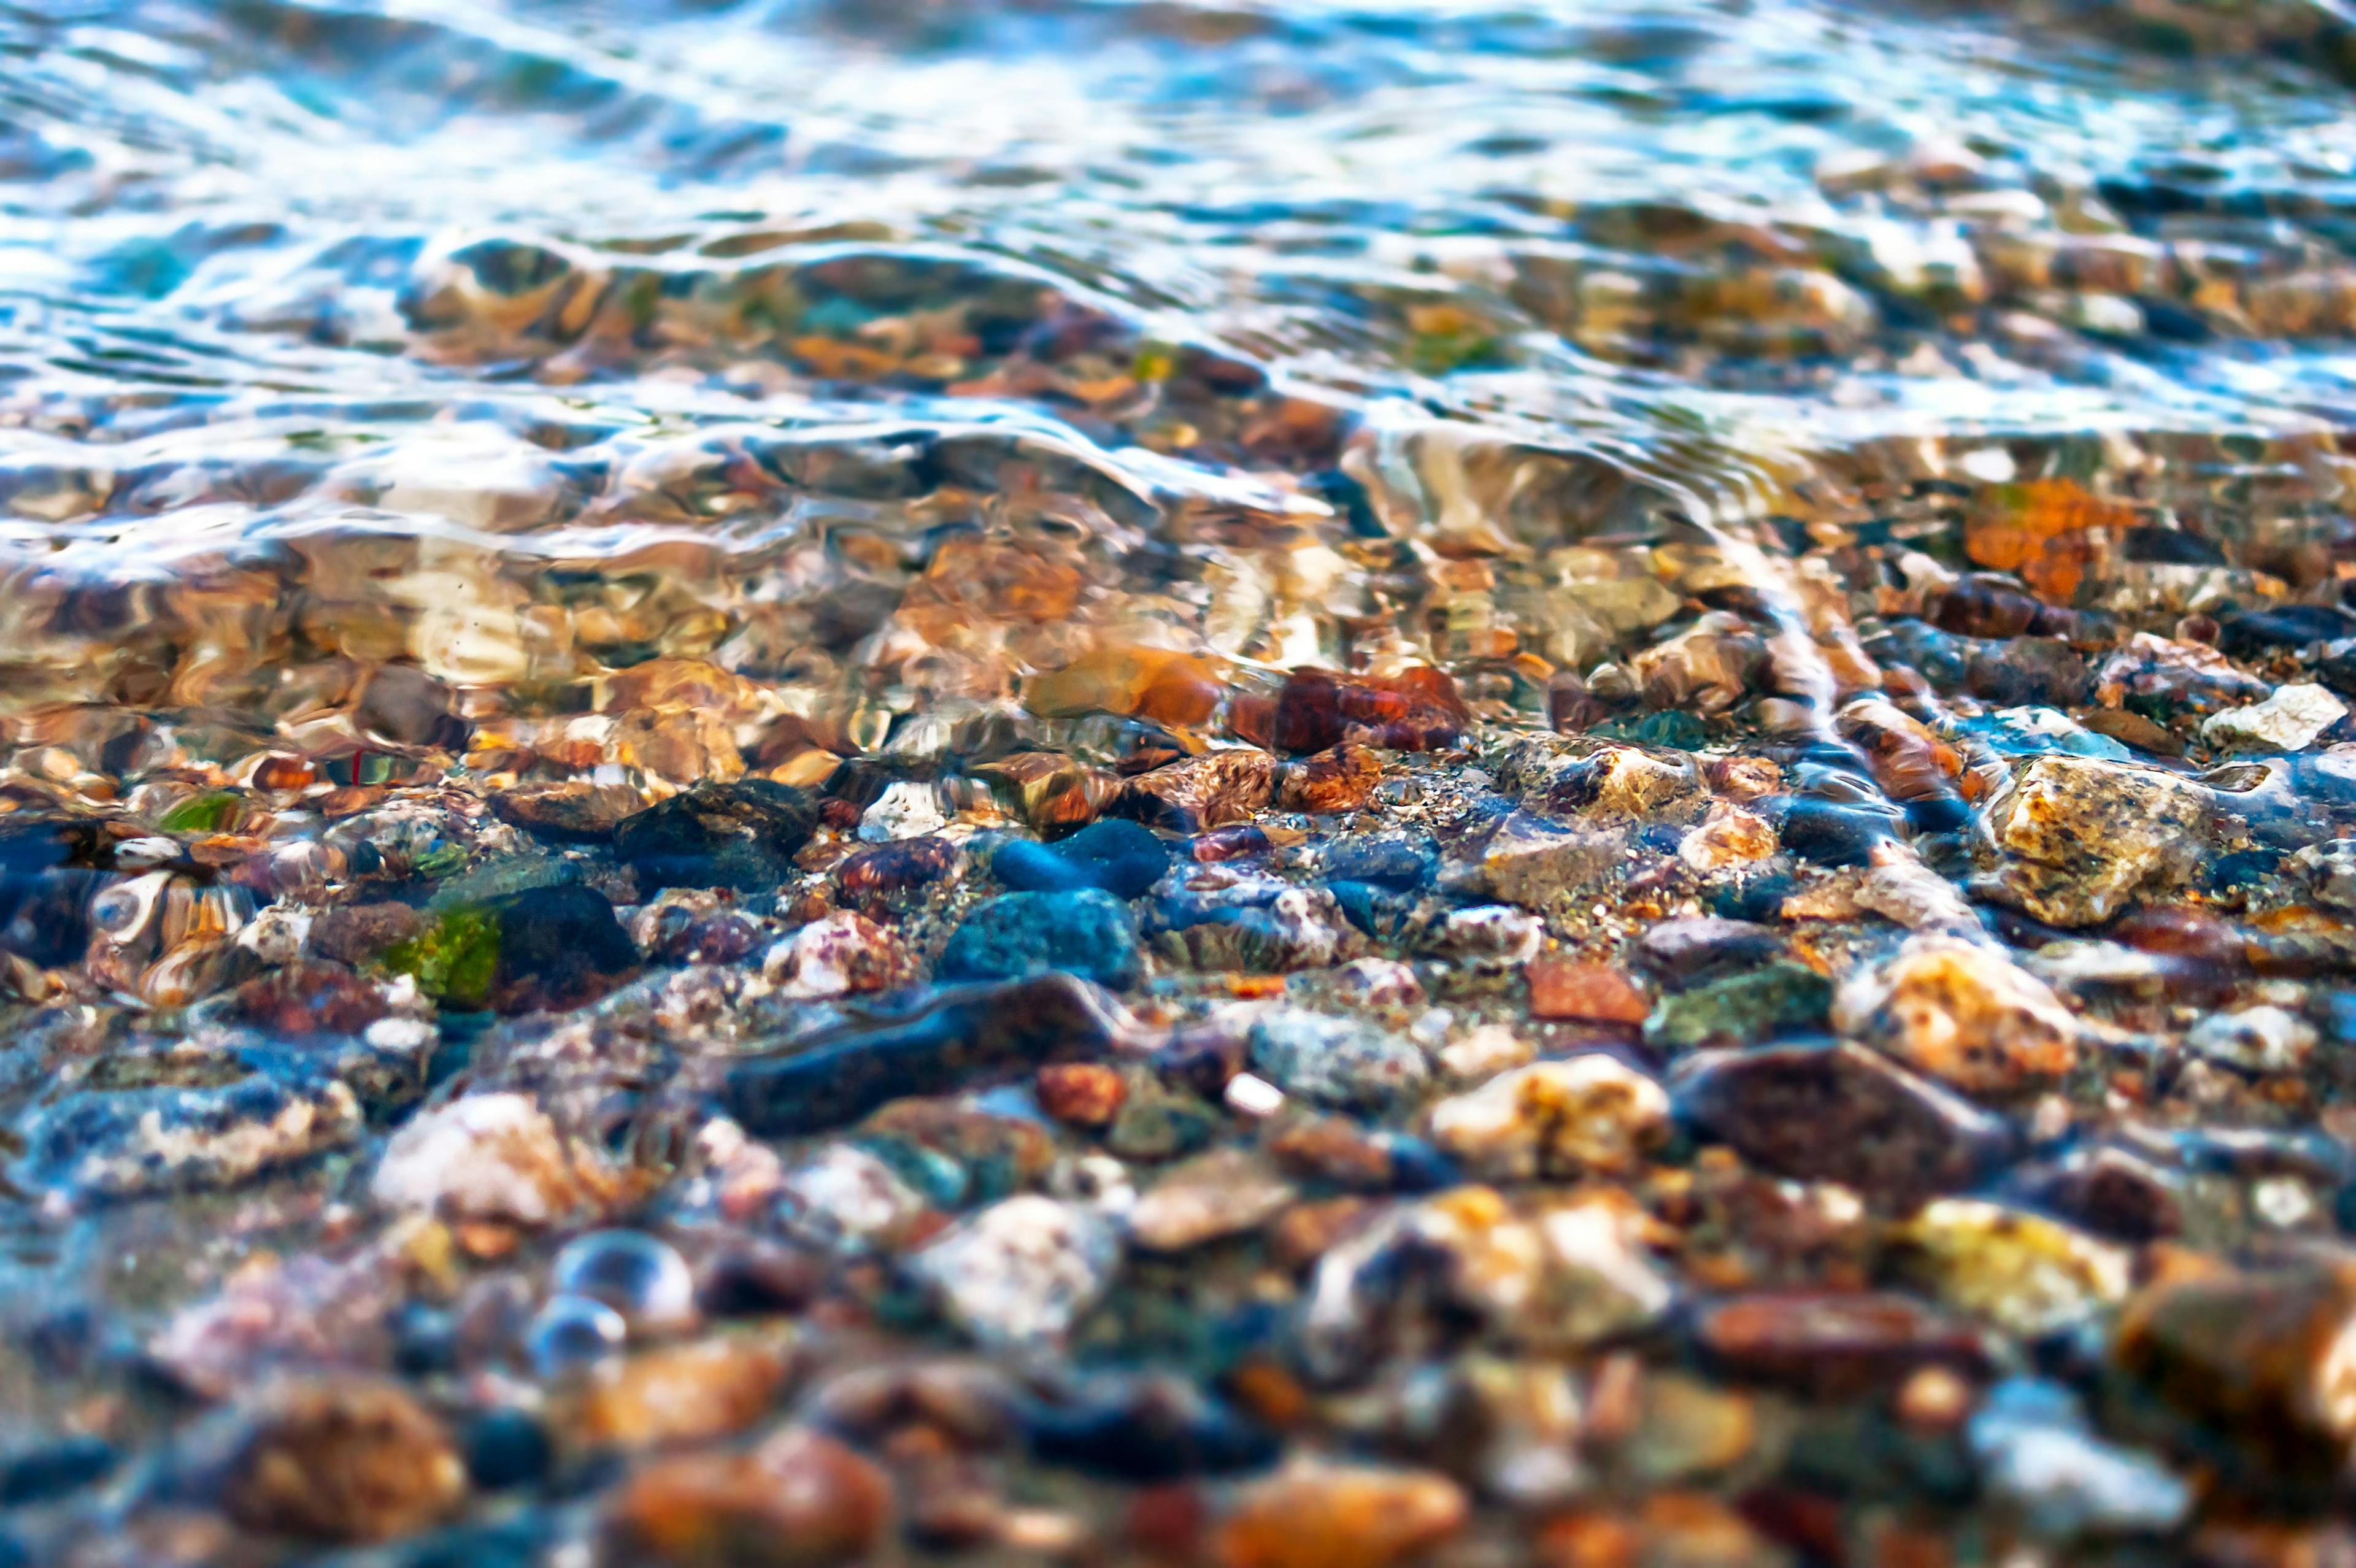 Close-up View of Colorful Pebbles in Water Waves. Travel Concept | Image Credit: © Eugene Put - stock.adobe.com